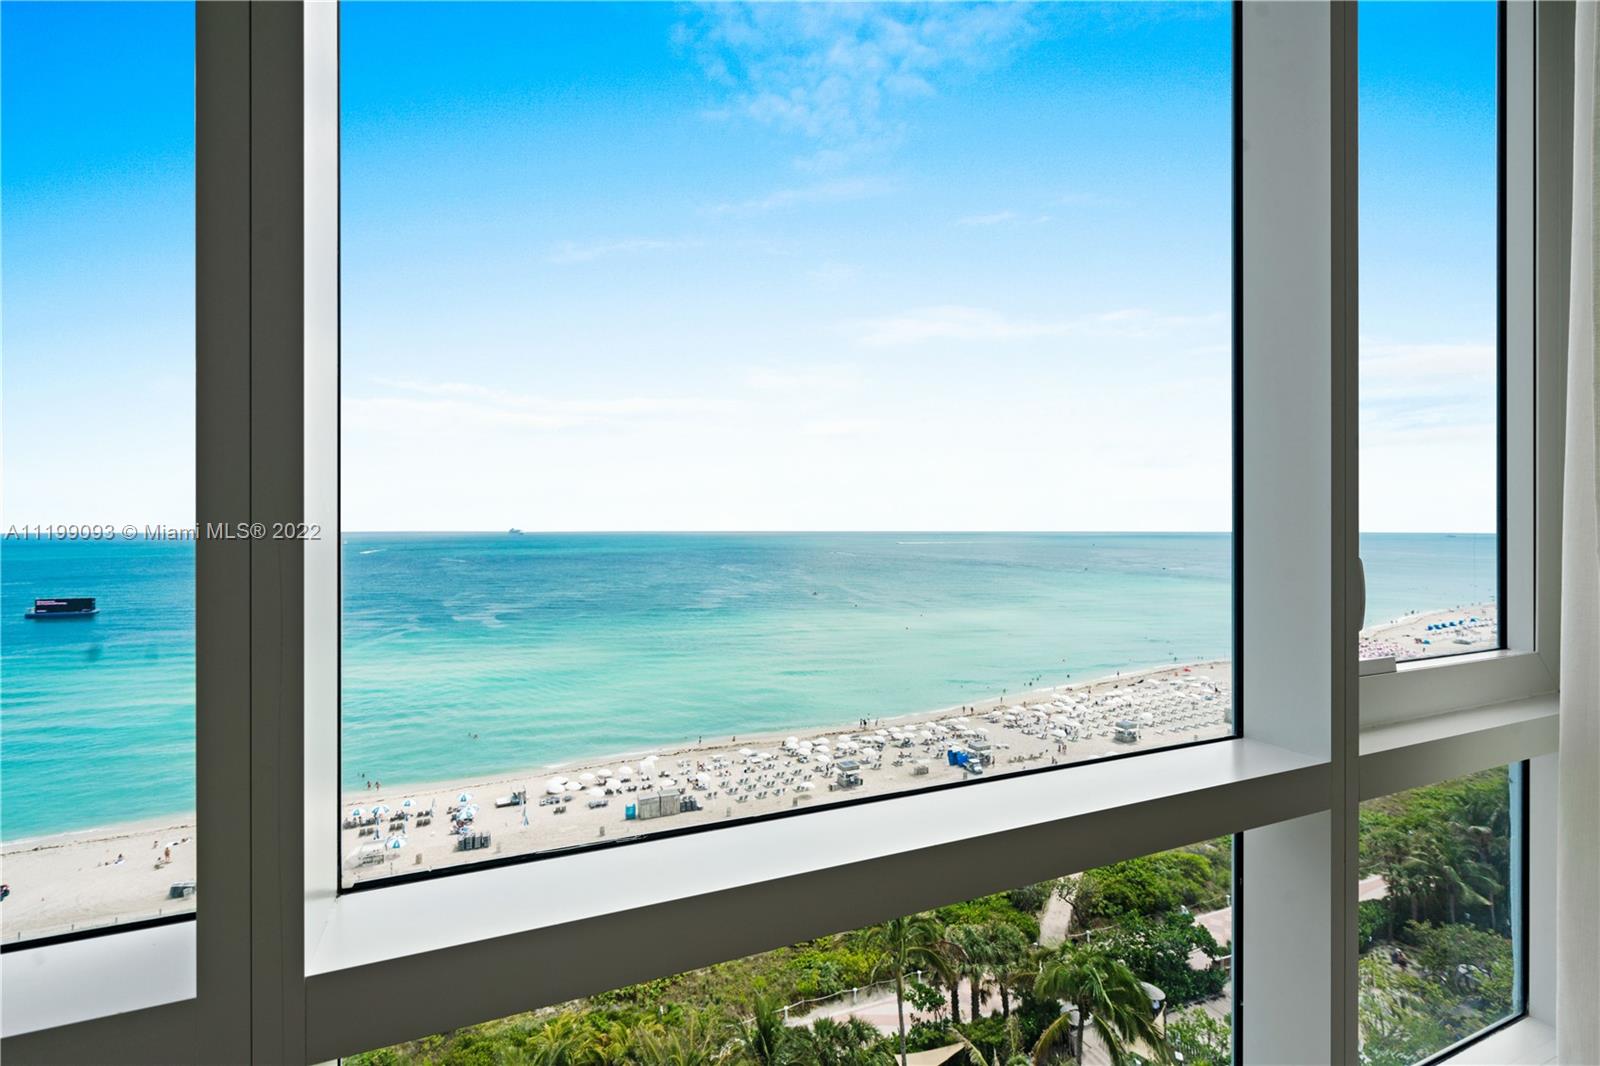 a view of ocean from a window